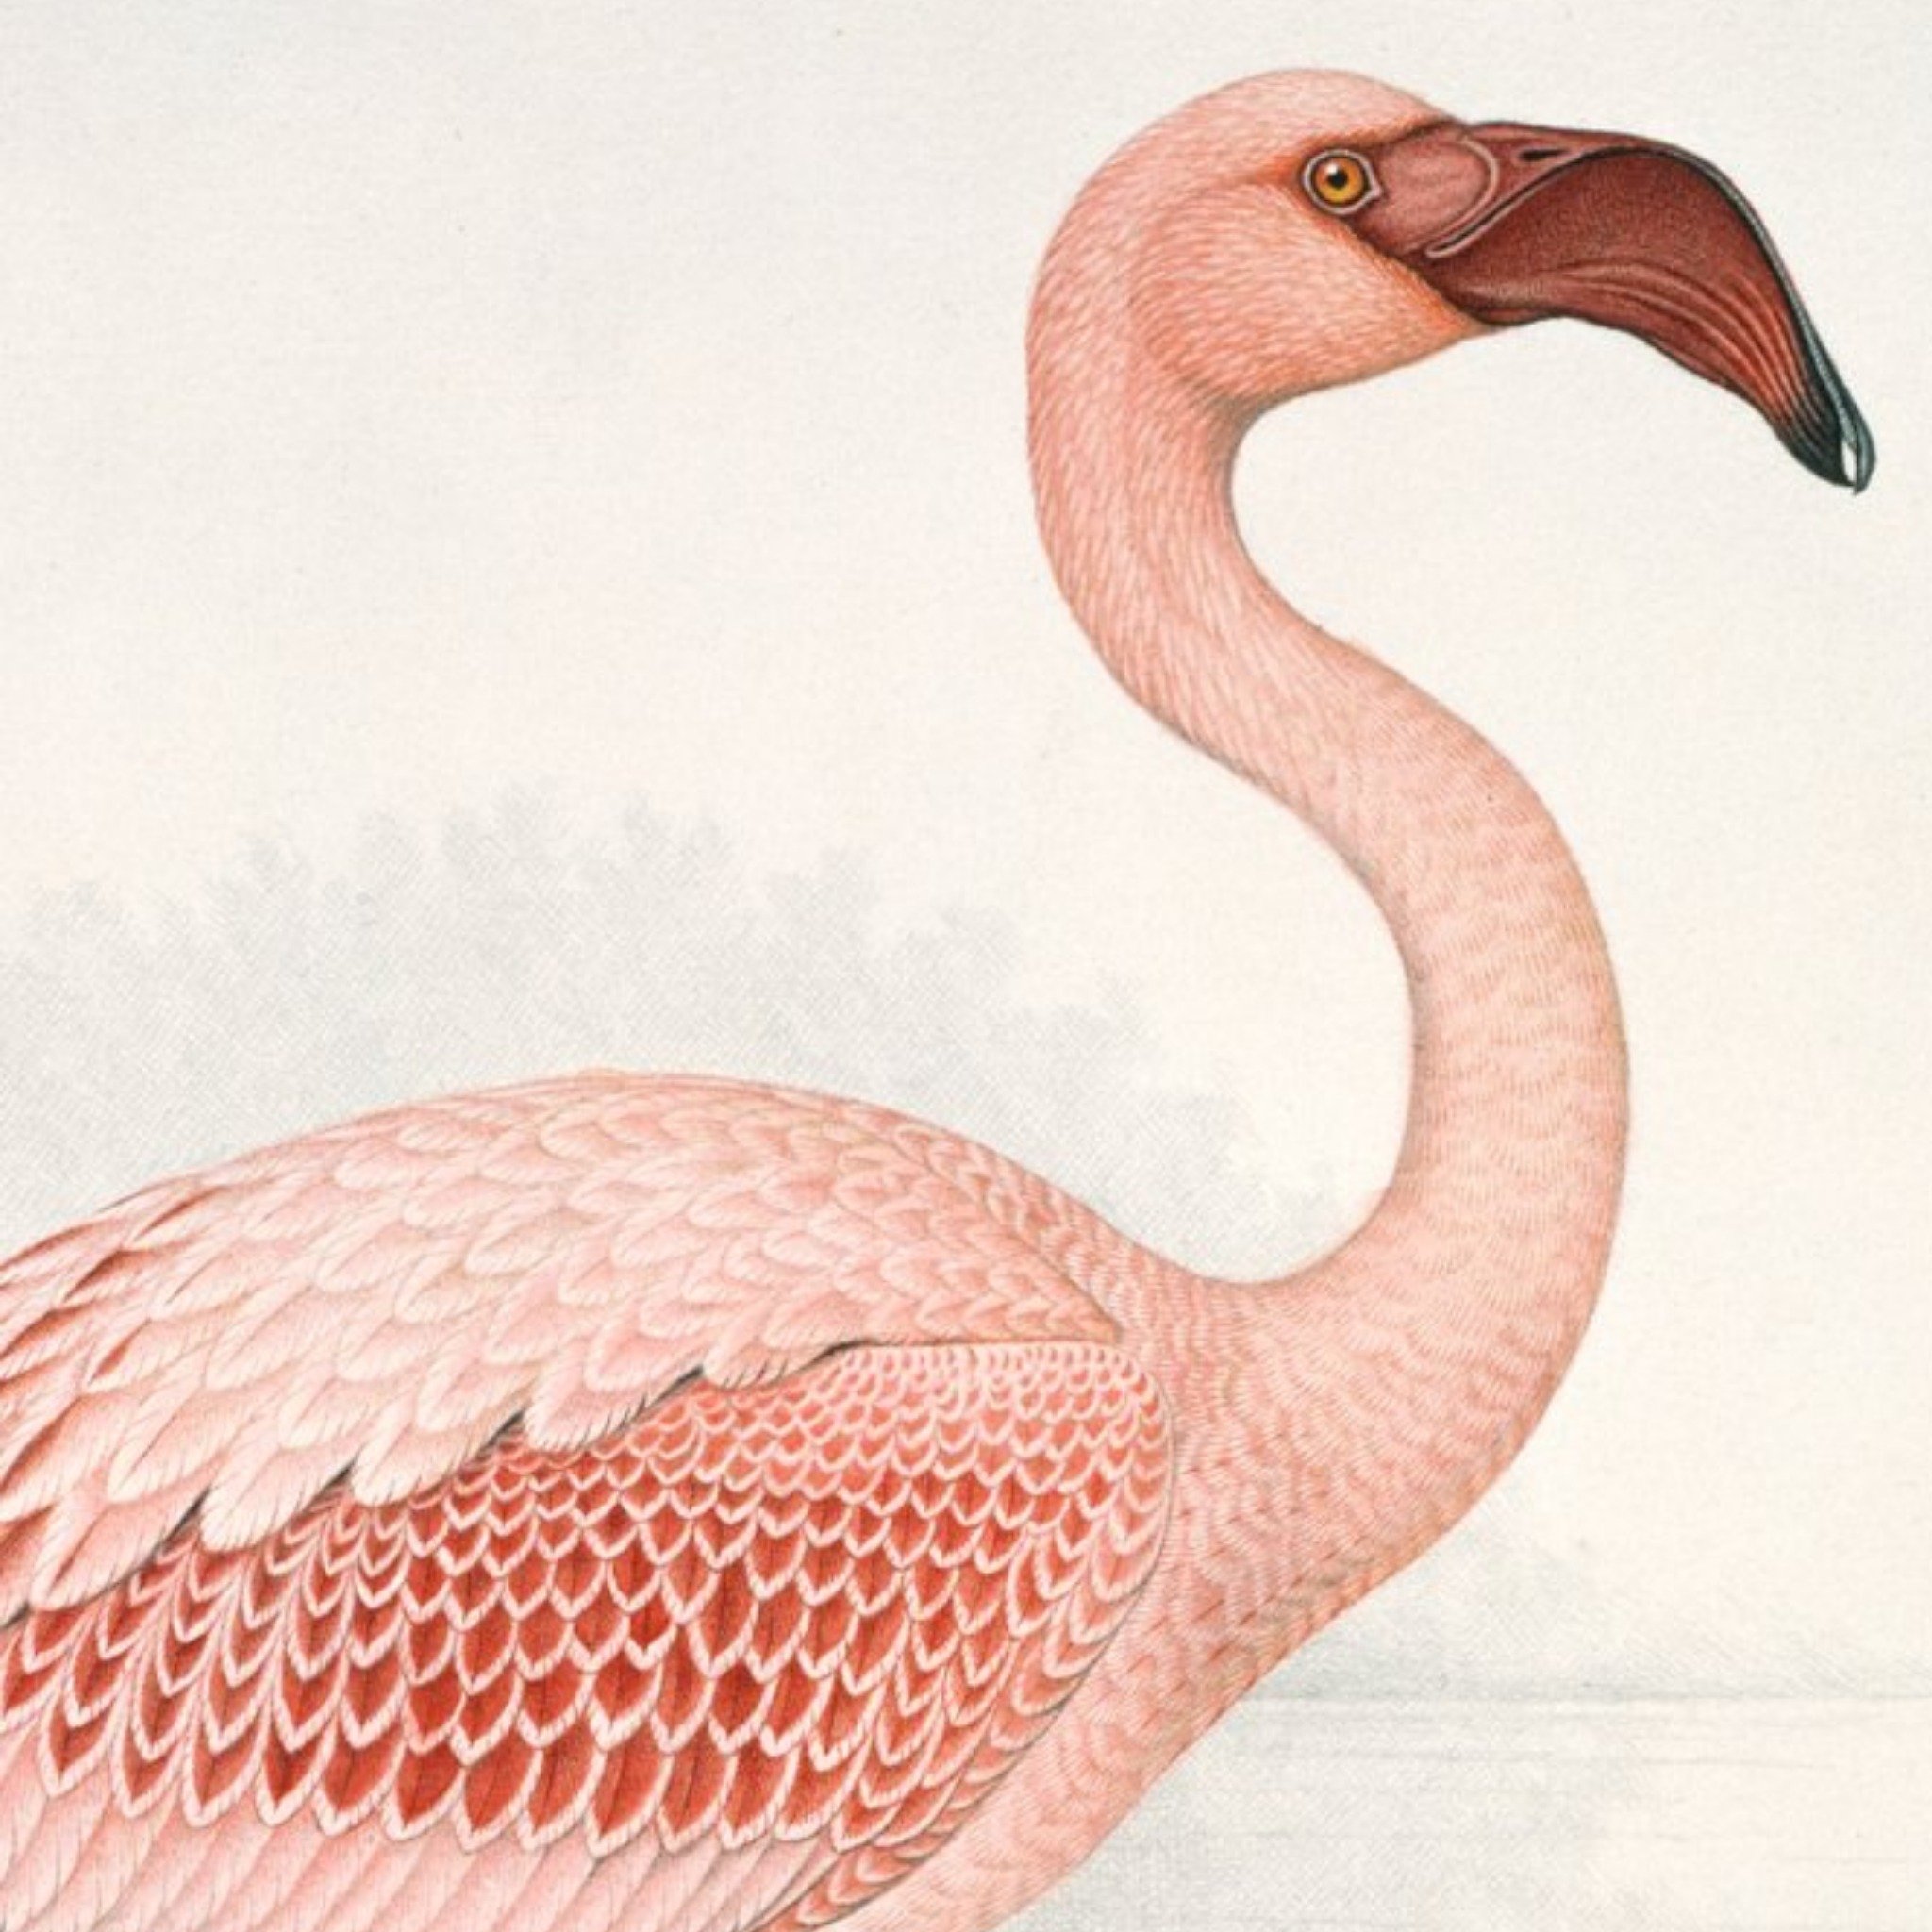 The Natural History Museum Illustrated Flamingo Card, Square